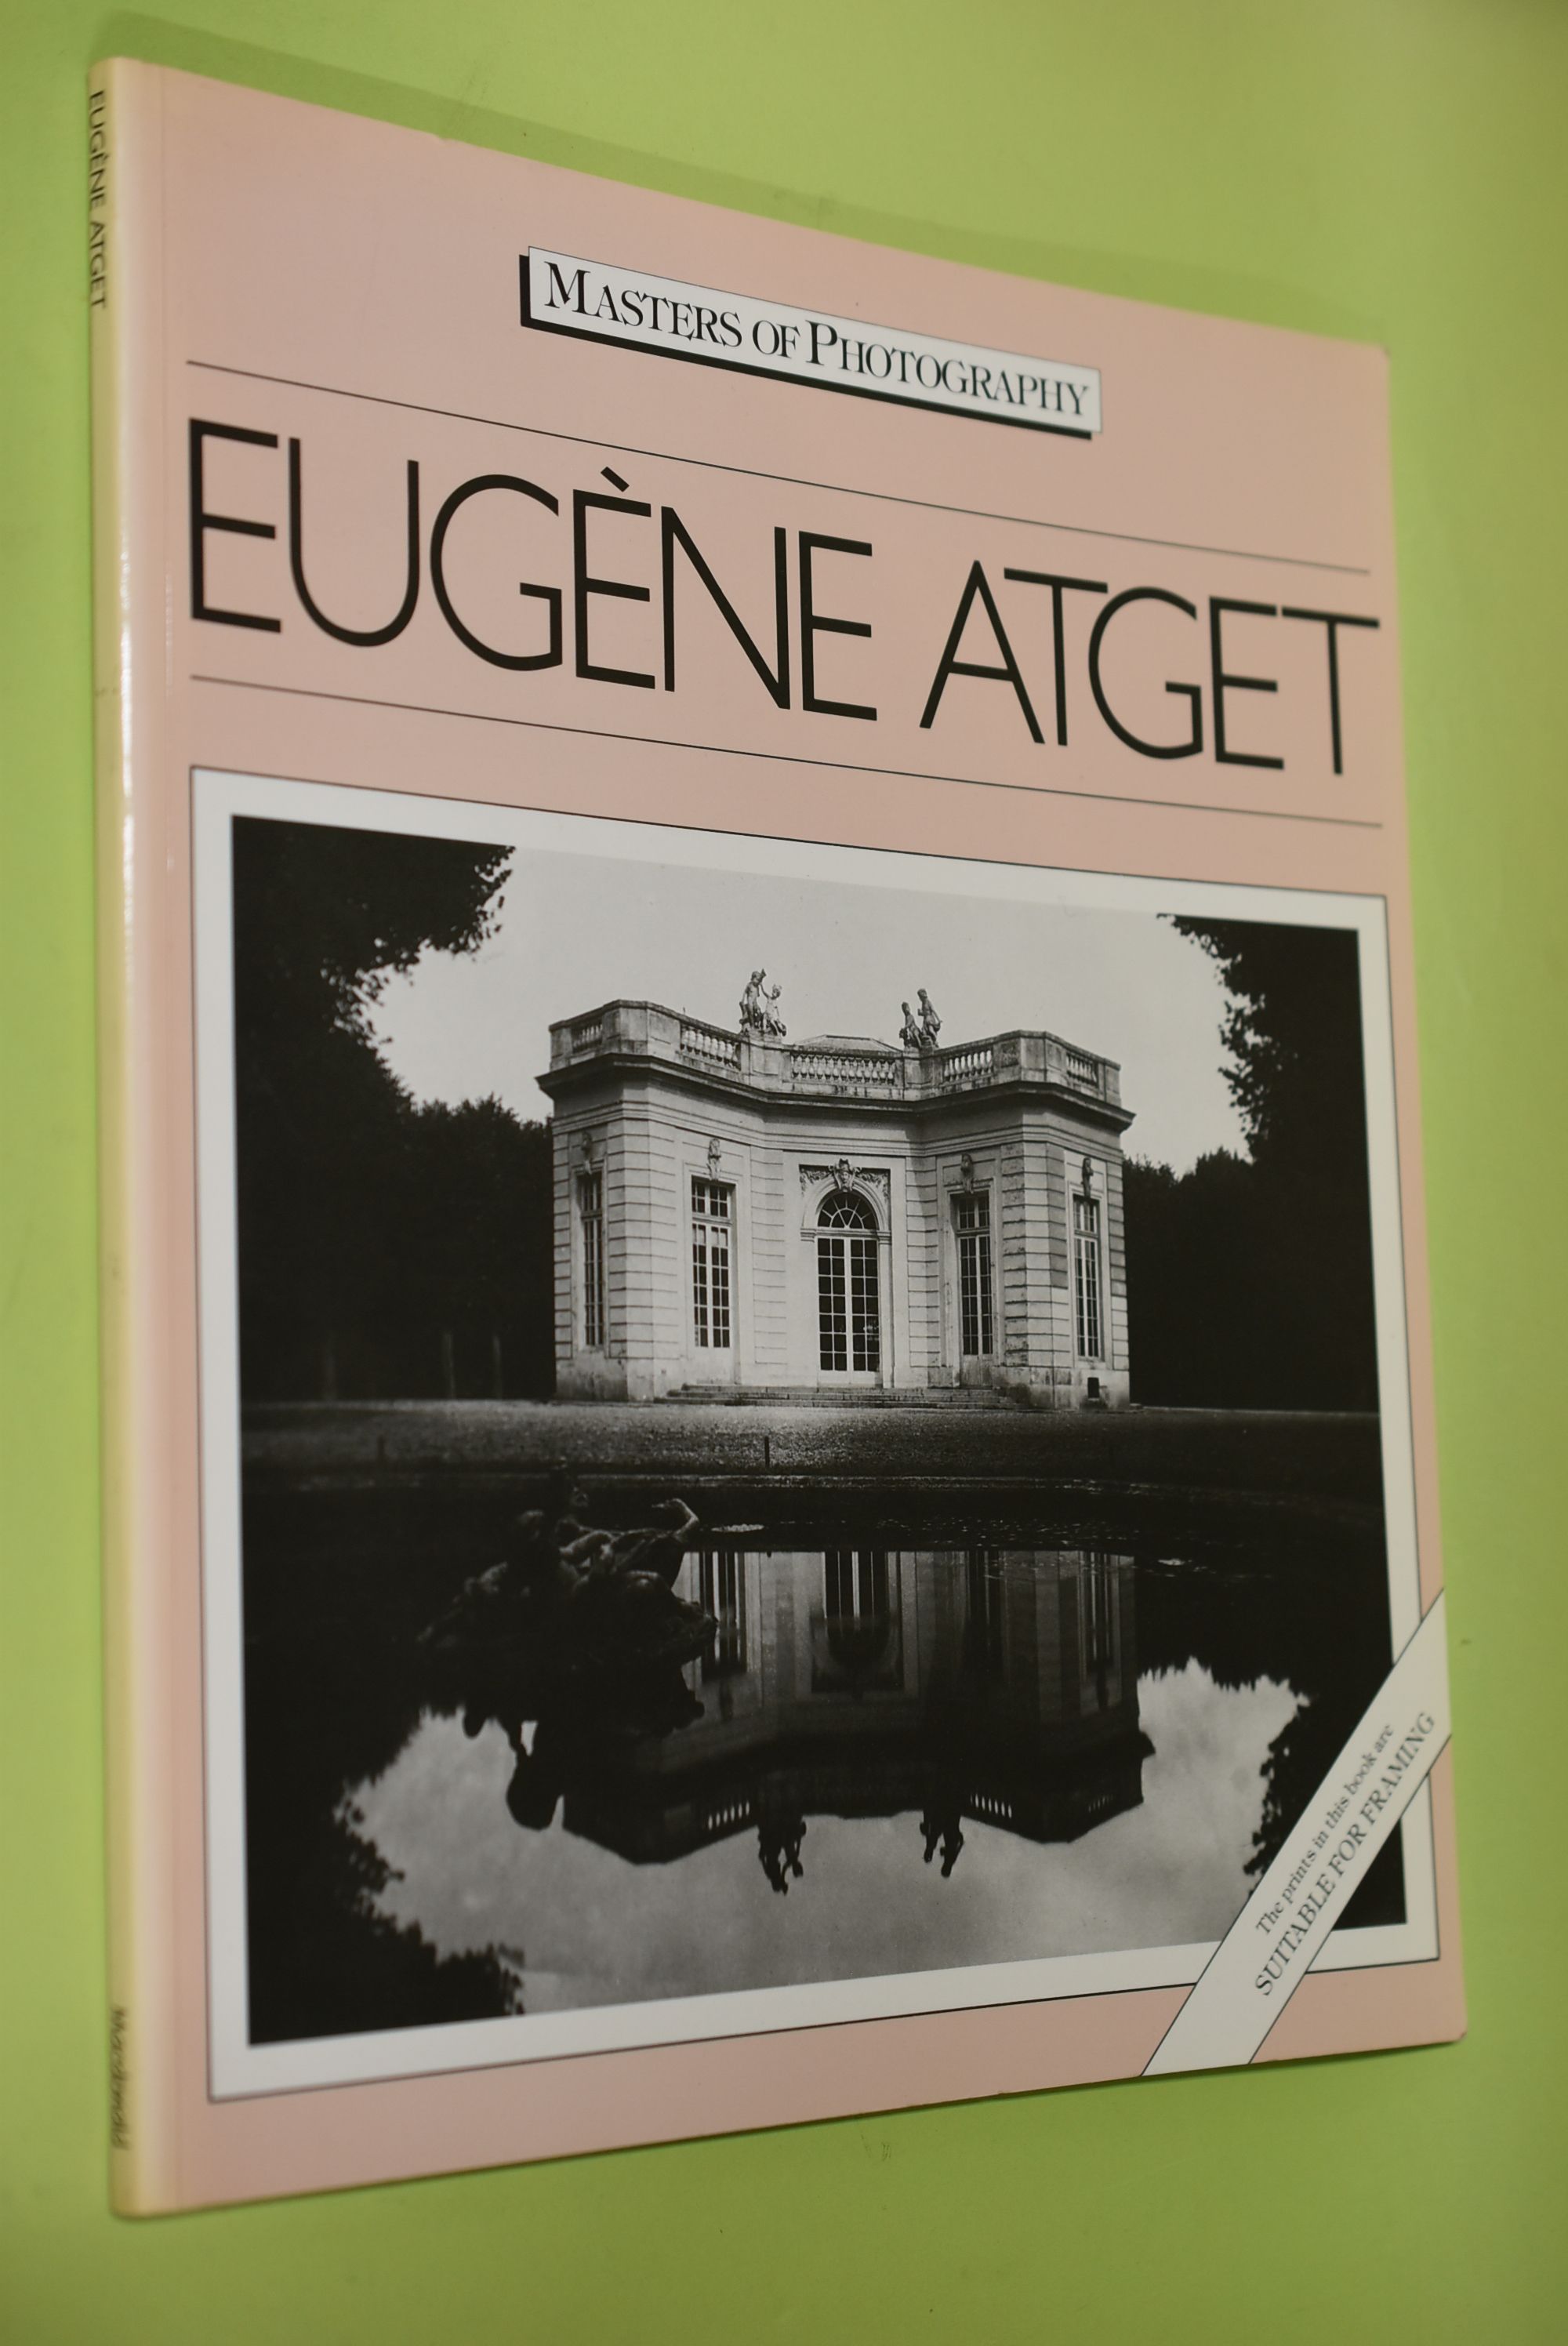 Masters of Photography: Eugene Atget The prints in this book are suitable for framing - Badger, Gerry and Eugene Atget